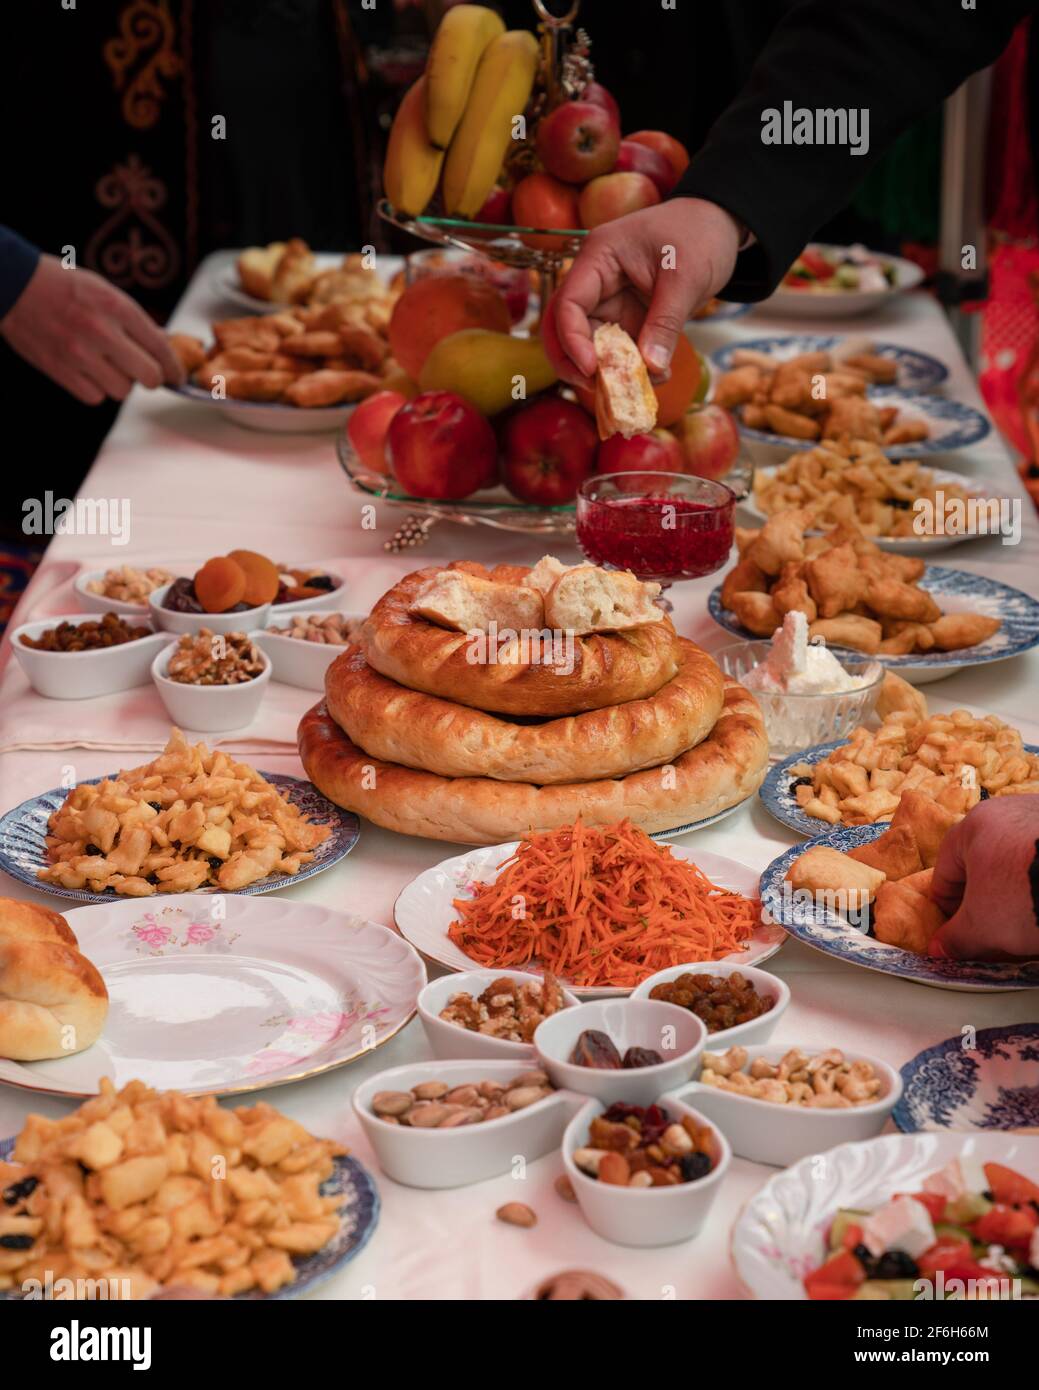 View of the banquet table. fruit and nut plates. Stock Photo